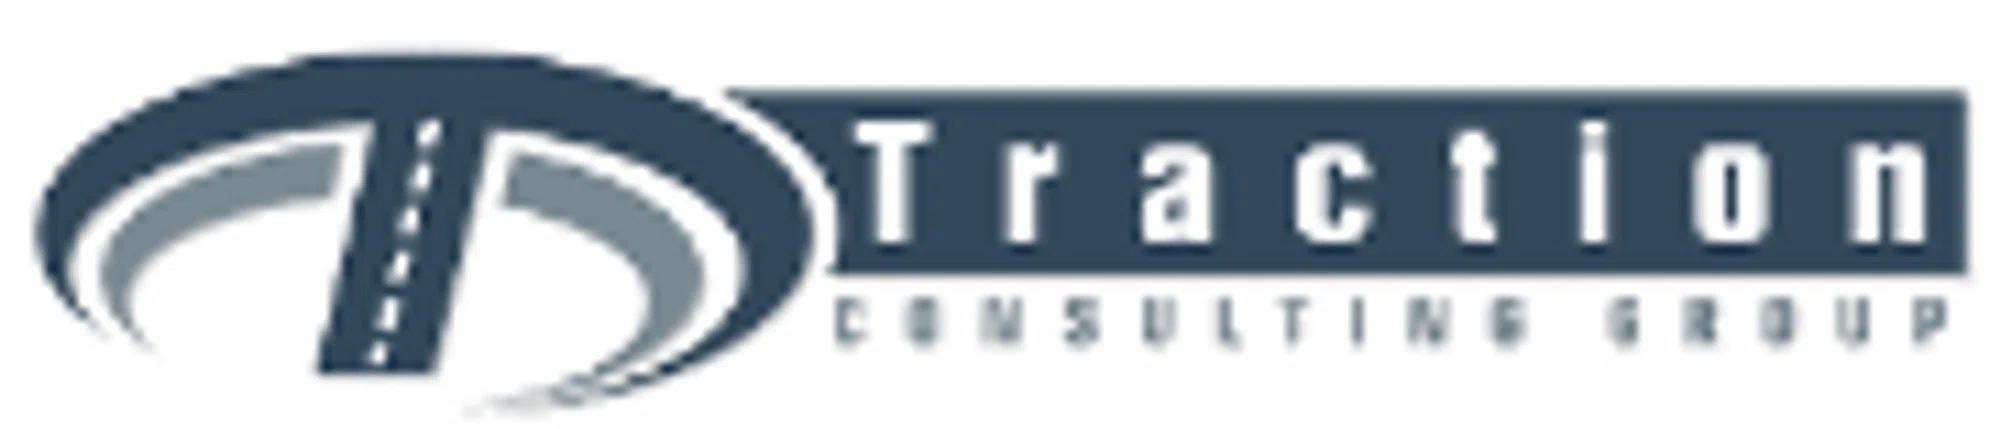 Traction Consulting Group